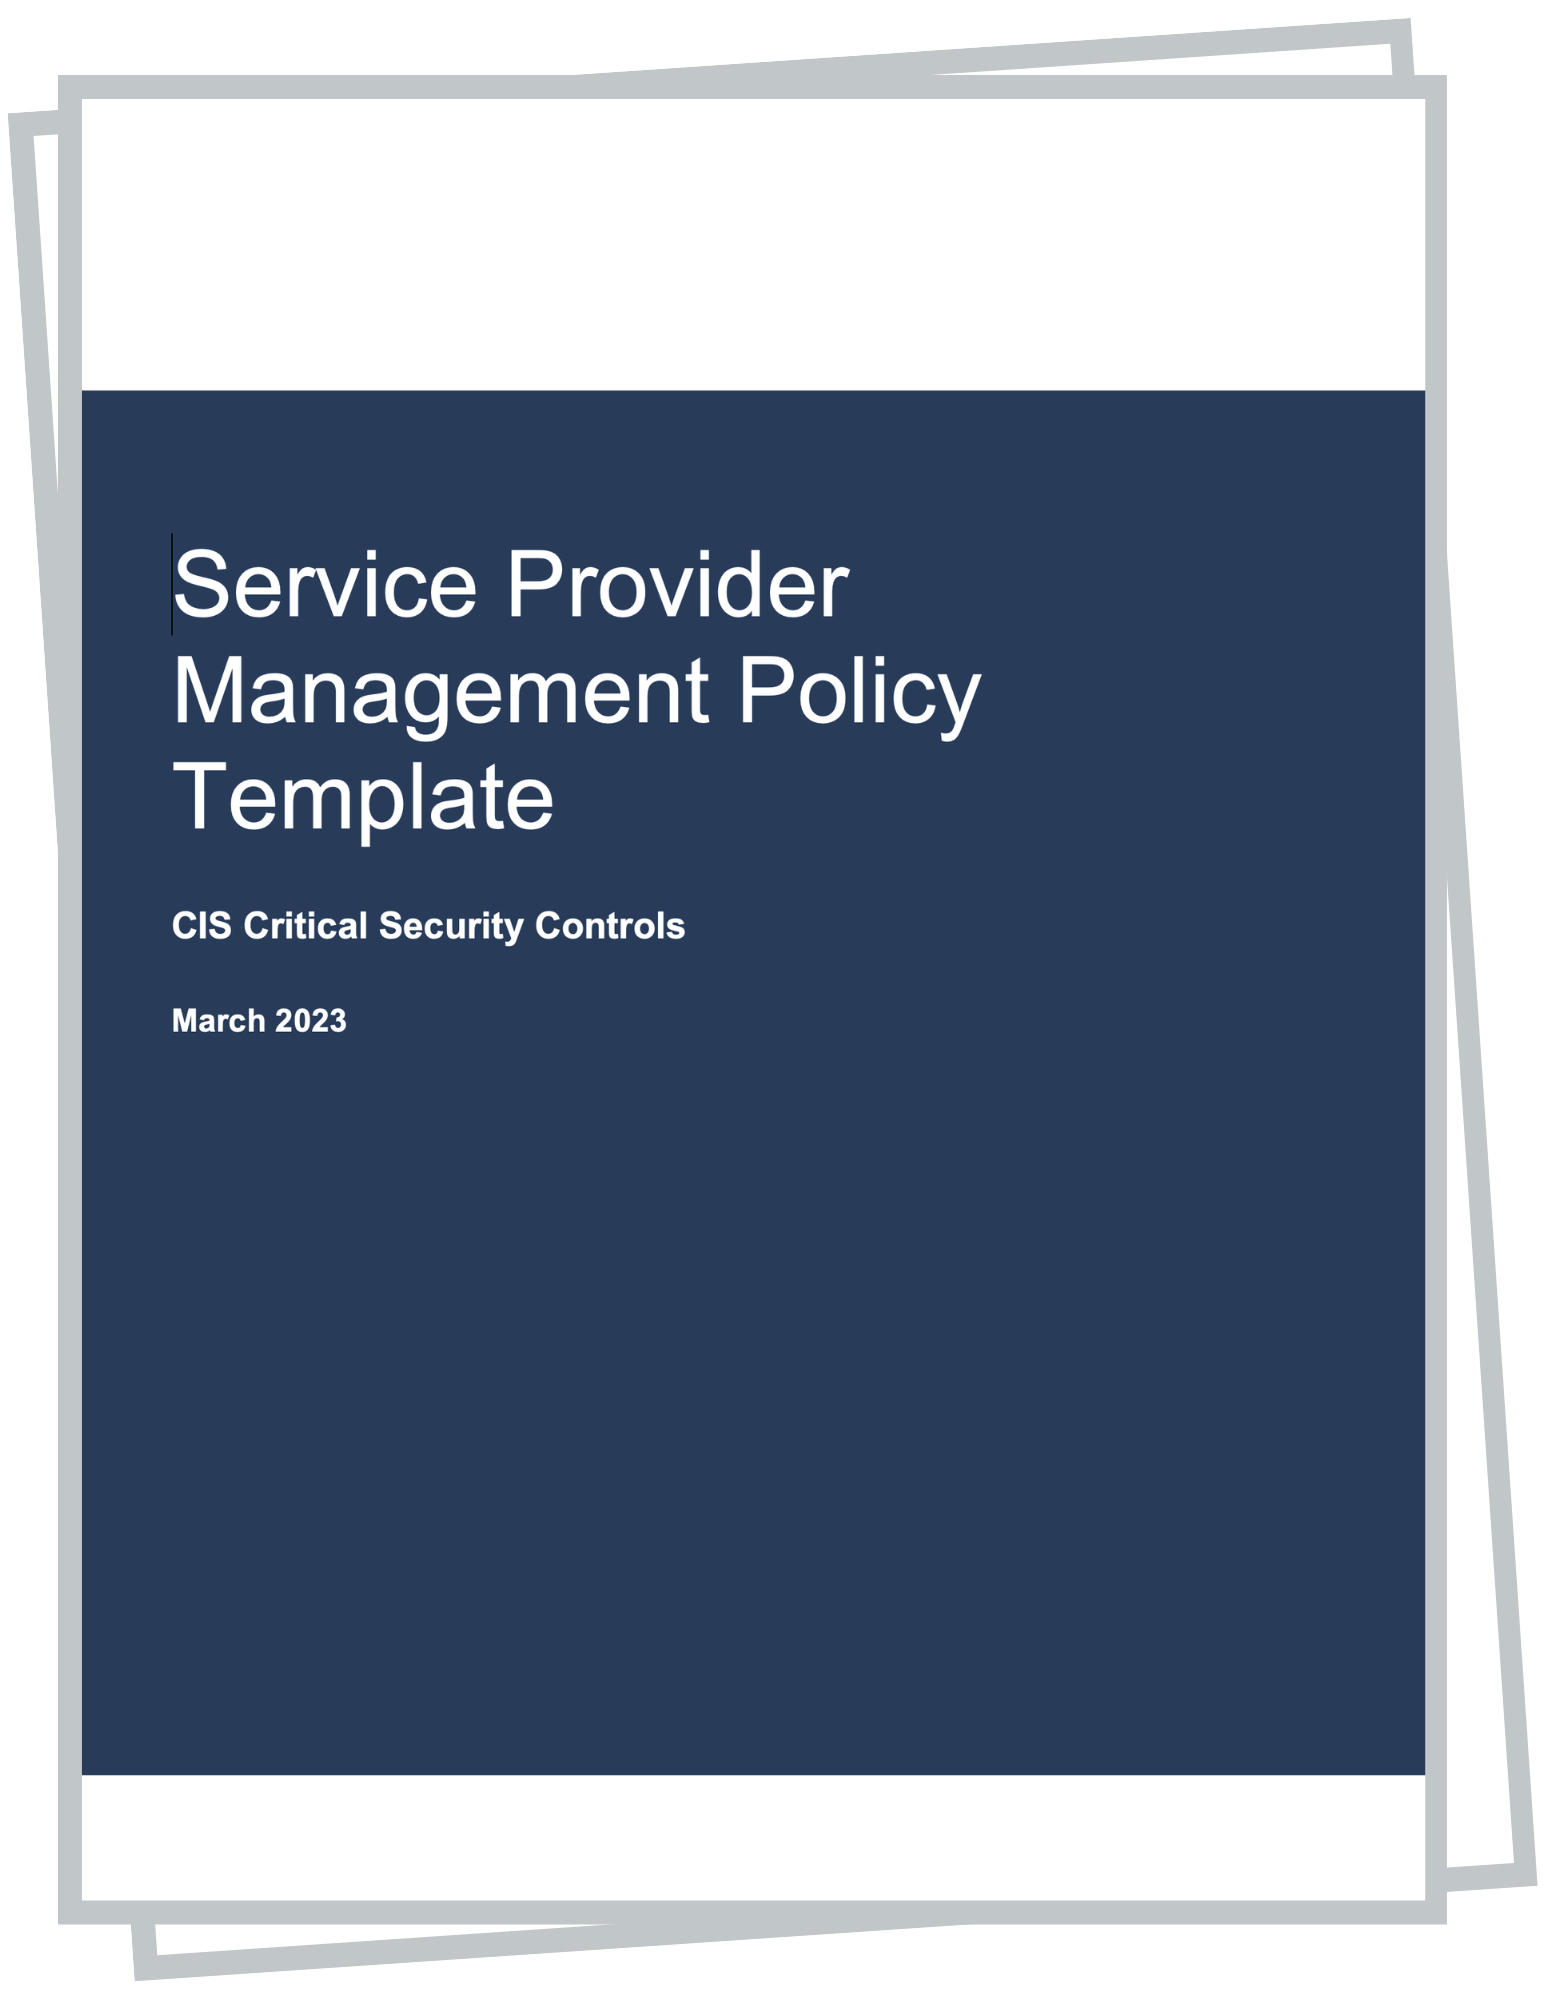 Service Provider Management Policy Template for CIS Control 15